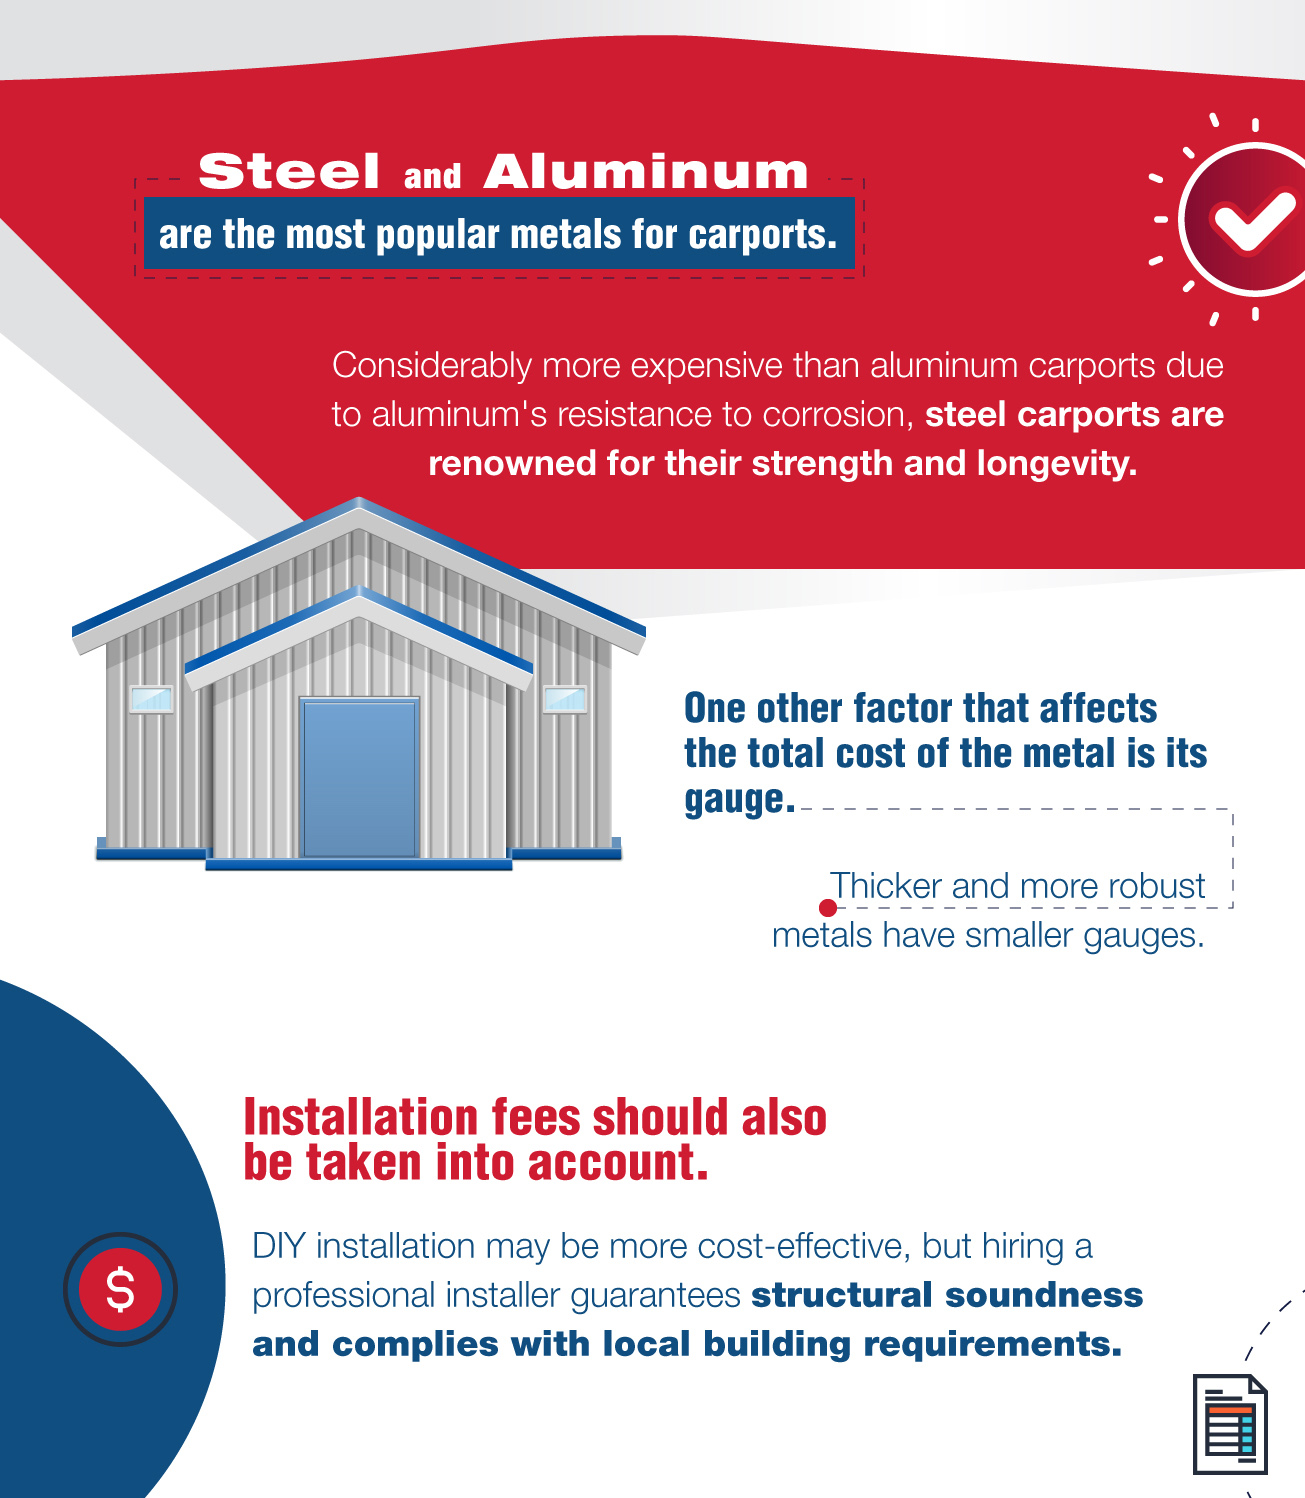 How to insulate a metal building?